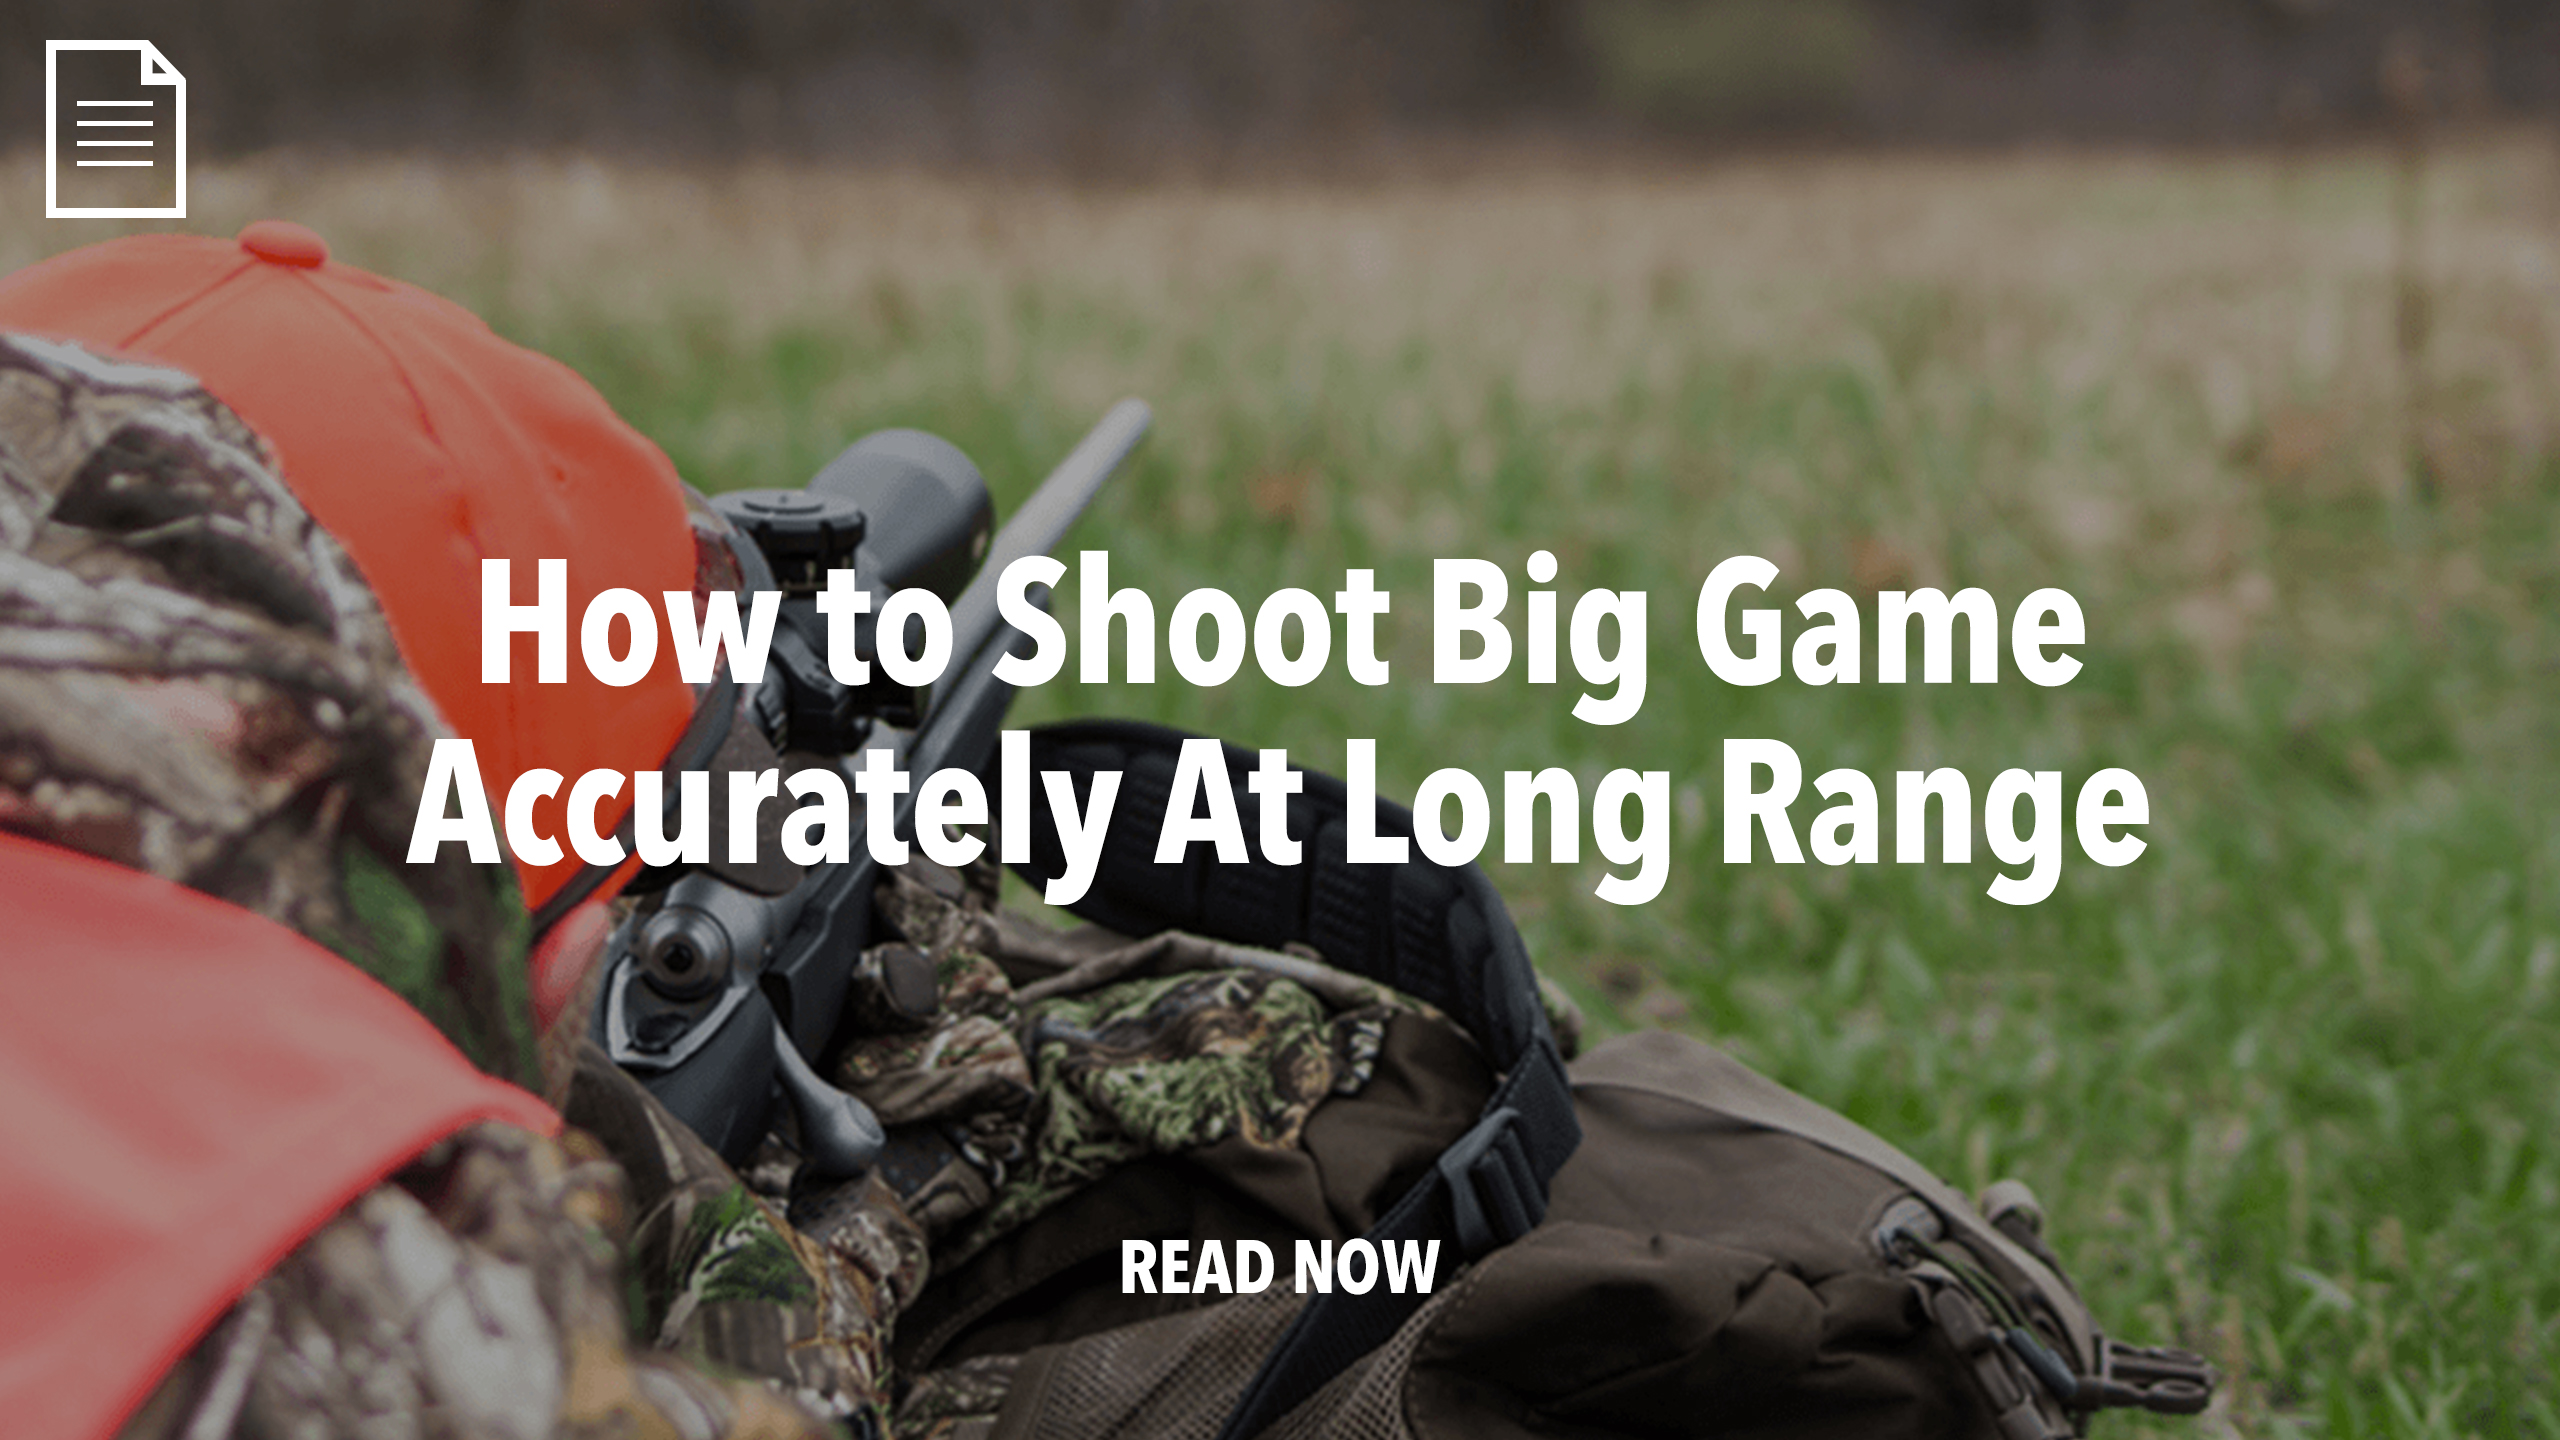 How to Shoot Big Game Accurately At Long Range